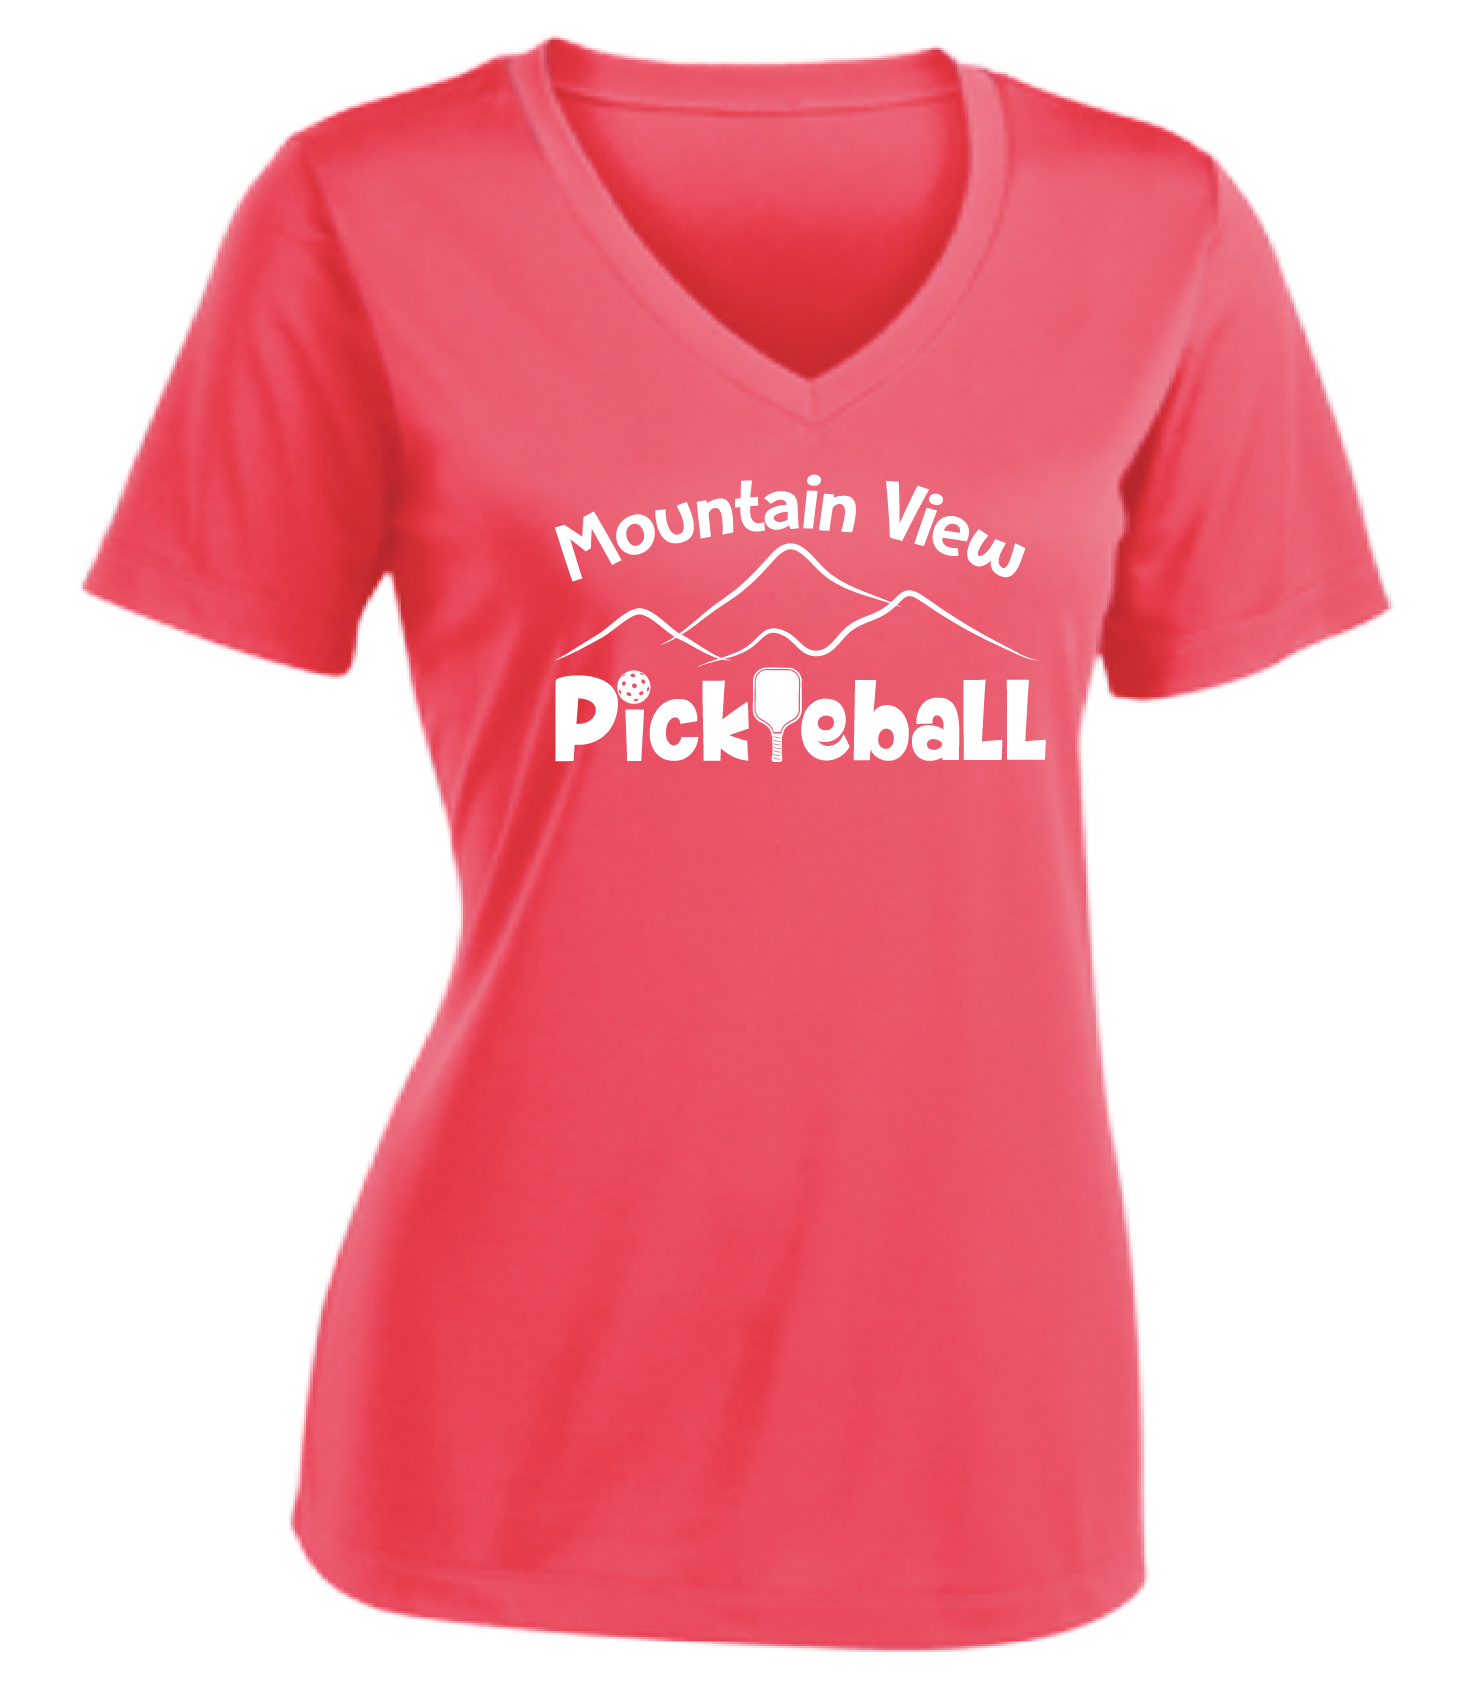 Pickleball Design: Mountain View Pickleball Club  Women's Style: Short-Sleeve V-Neck  Turn up the volume in this Women's shirt with its perfect mix of softness and attitude. Material is ultra-comfortable with moisture wicking properties and tri-blend softness. PosiCharge technology locks in color. Highly breathable and lightweight.